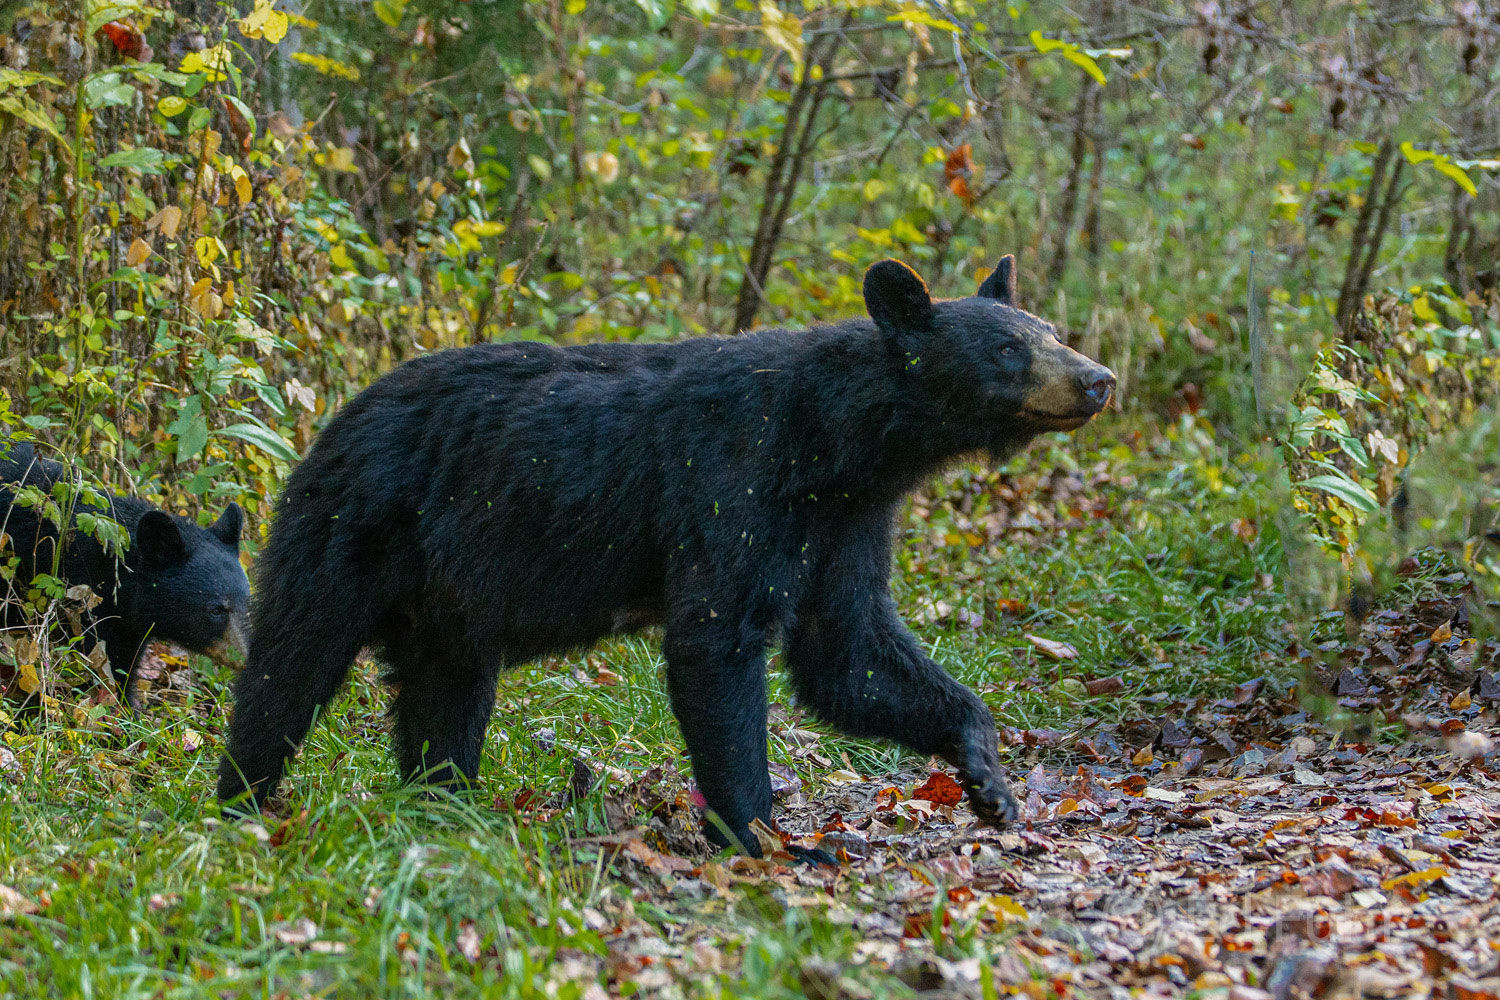 A black bear steps out of the woods, leading her cubs into the meadow where they will feed on grasses, berries and fallen nuts...